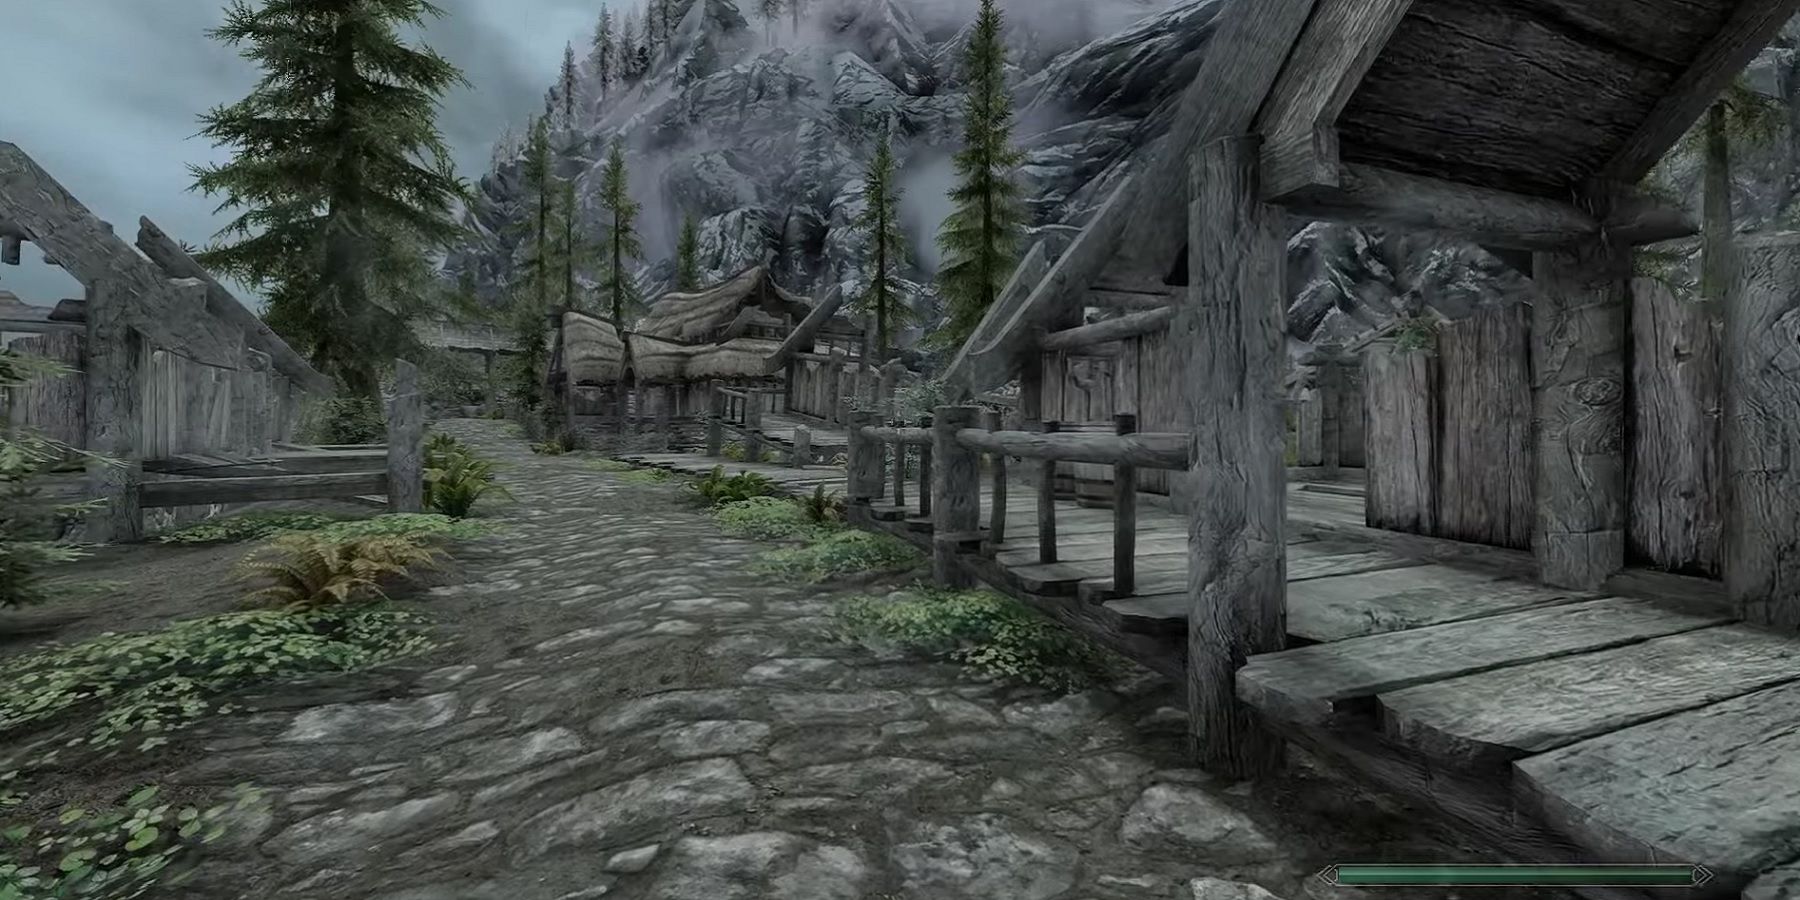 Image from Skyrim showing an empty Riverwood with dilapidated buildings.